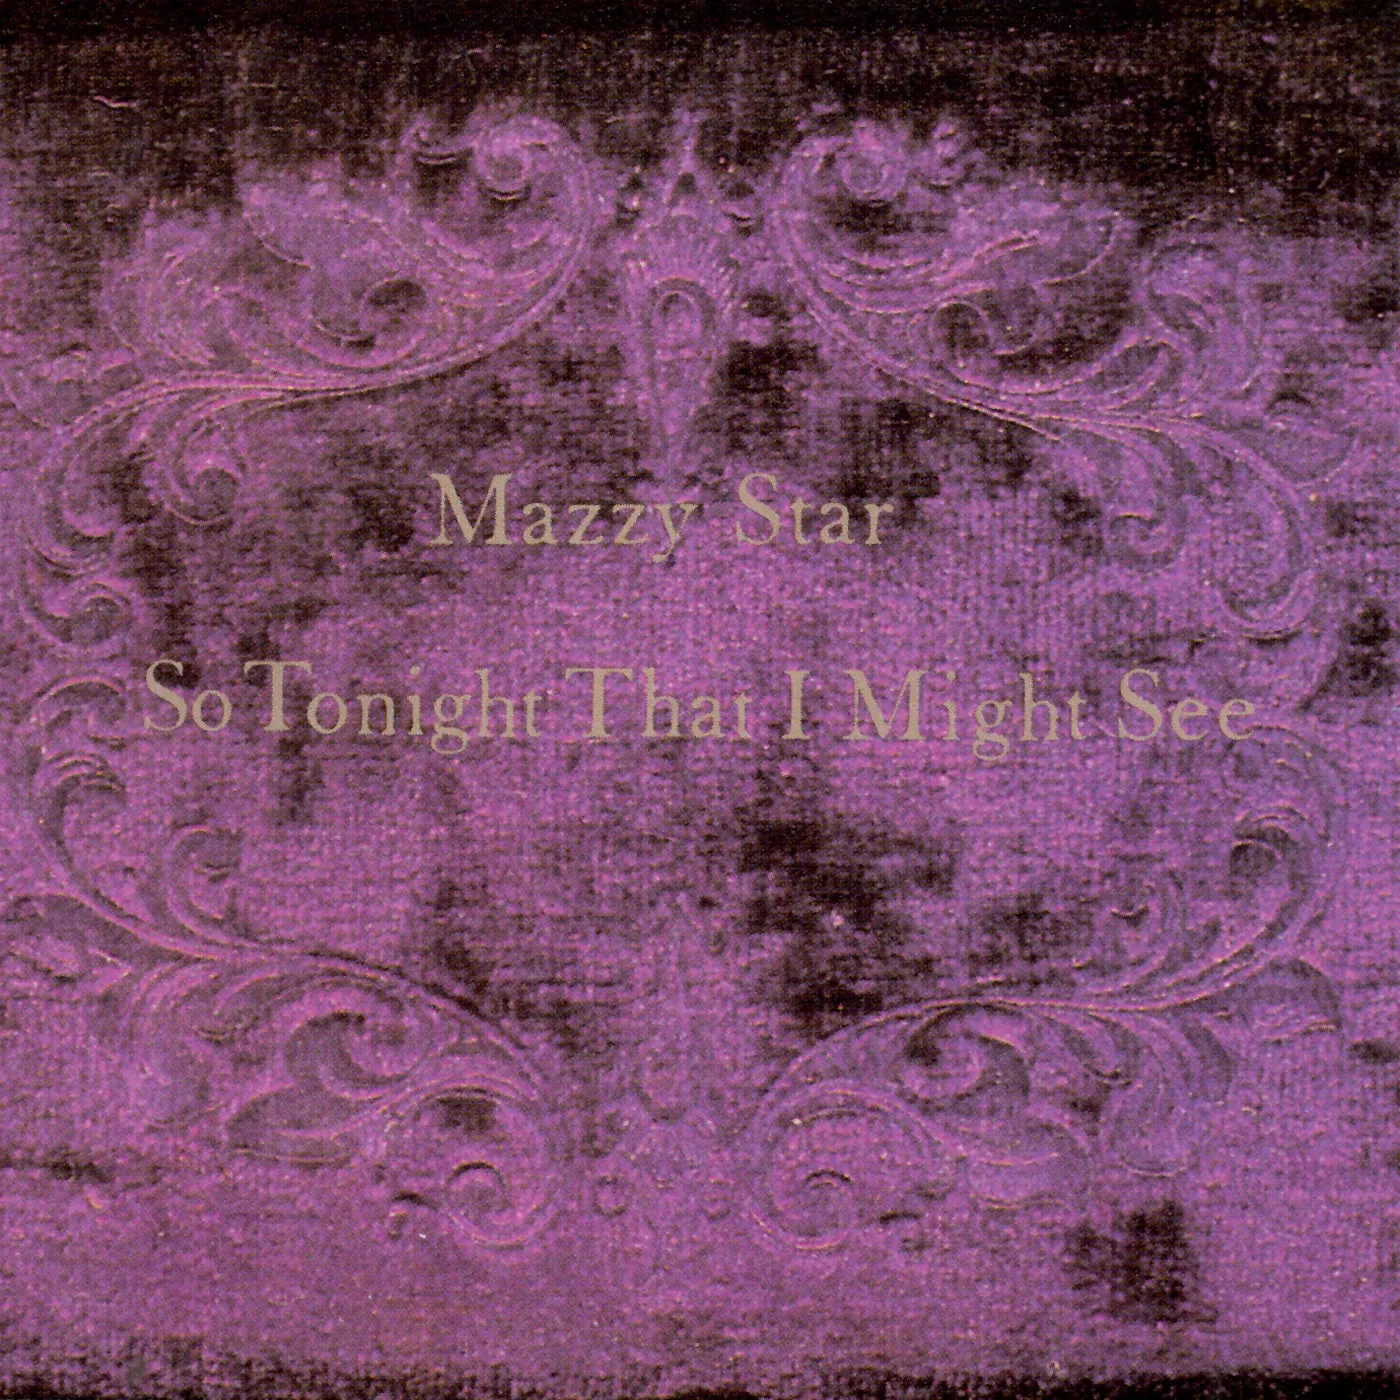 <strong>Mazzy Star - So Tonight That I Might See</strong> (Vinyl LP - black)